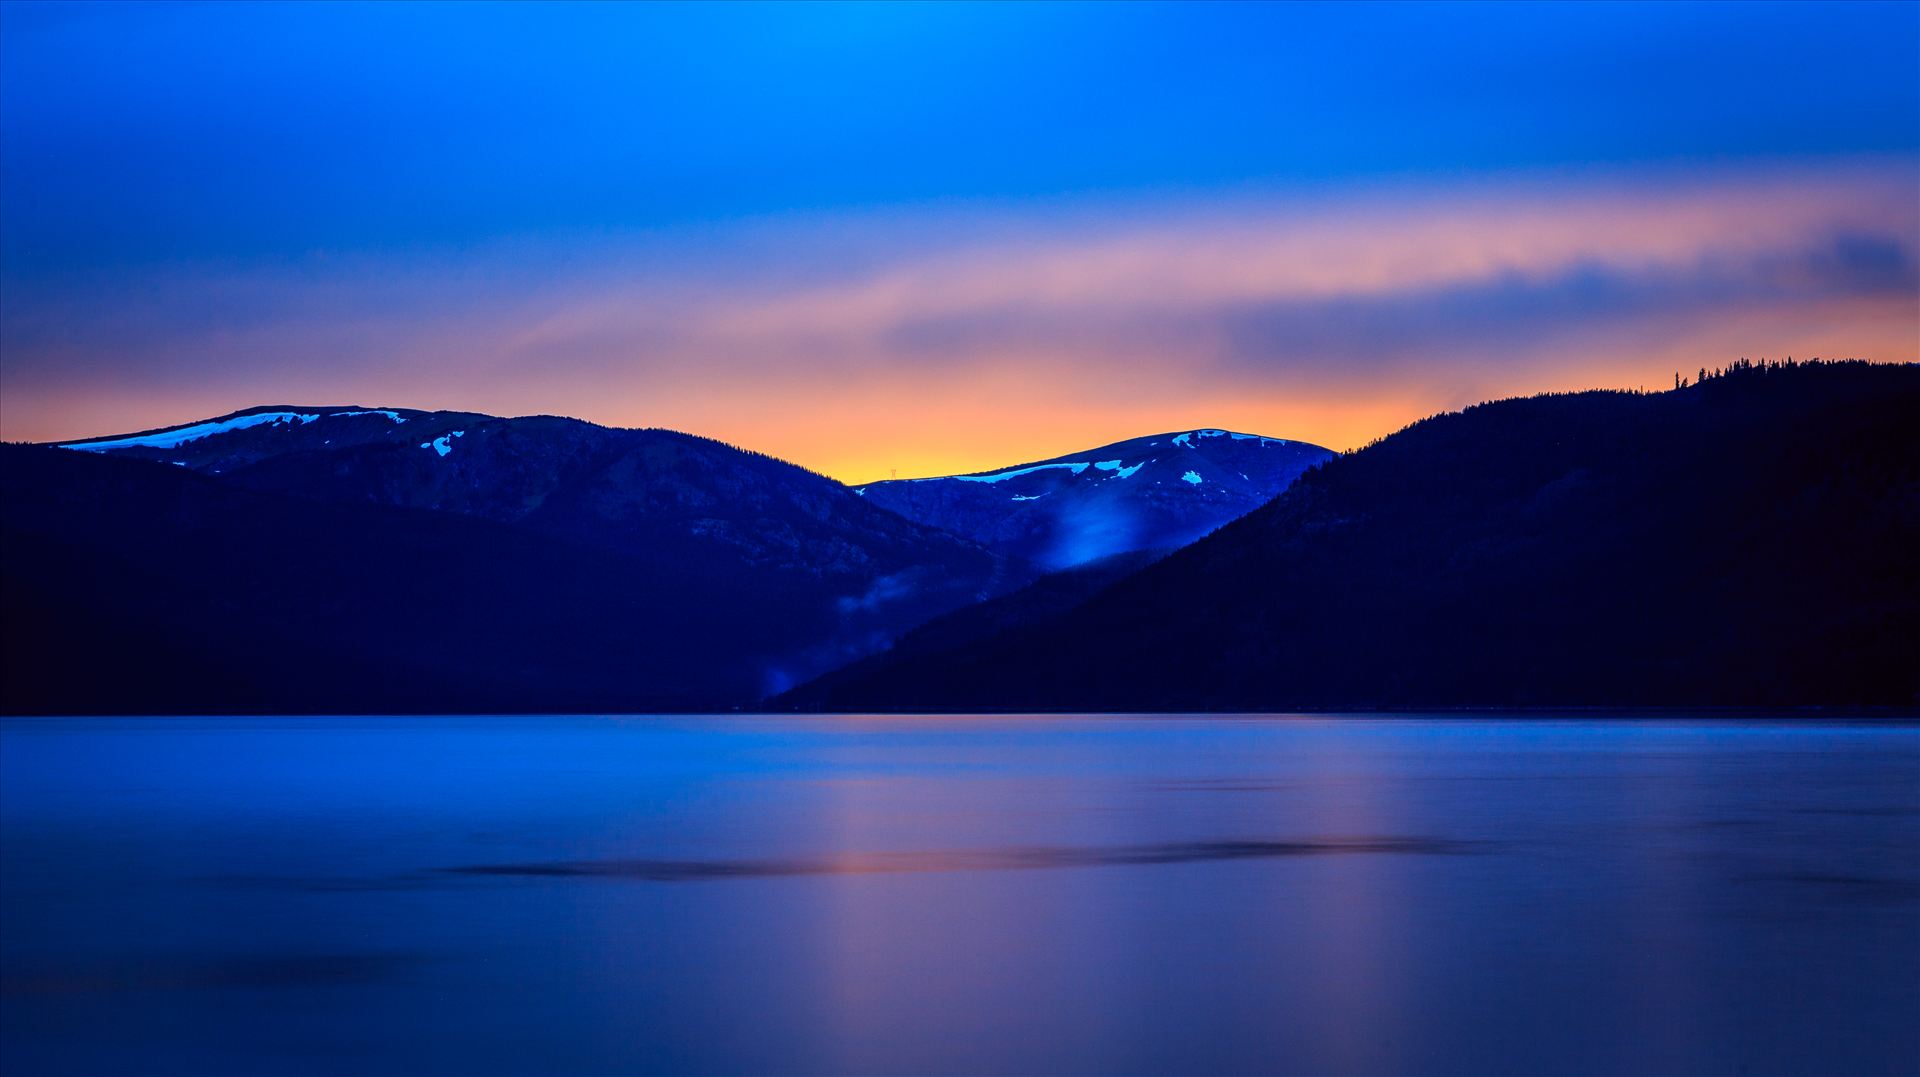 Sunset on Turquoise I - Sunset on the calm protected waters of Turqouise Lake, Leadville Colorado. by Scott Smith Photos